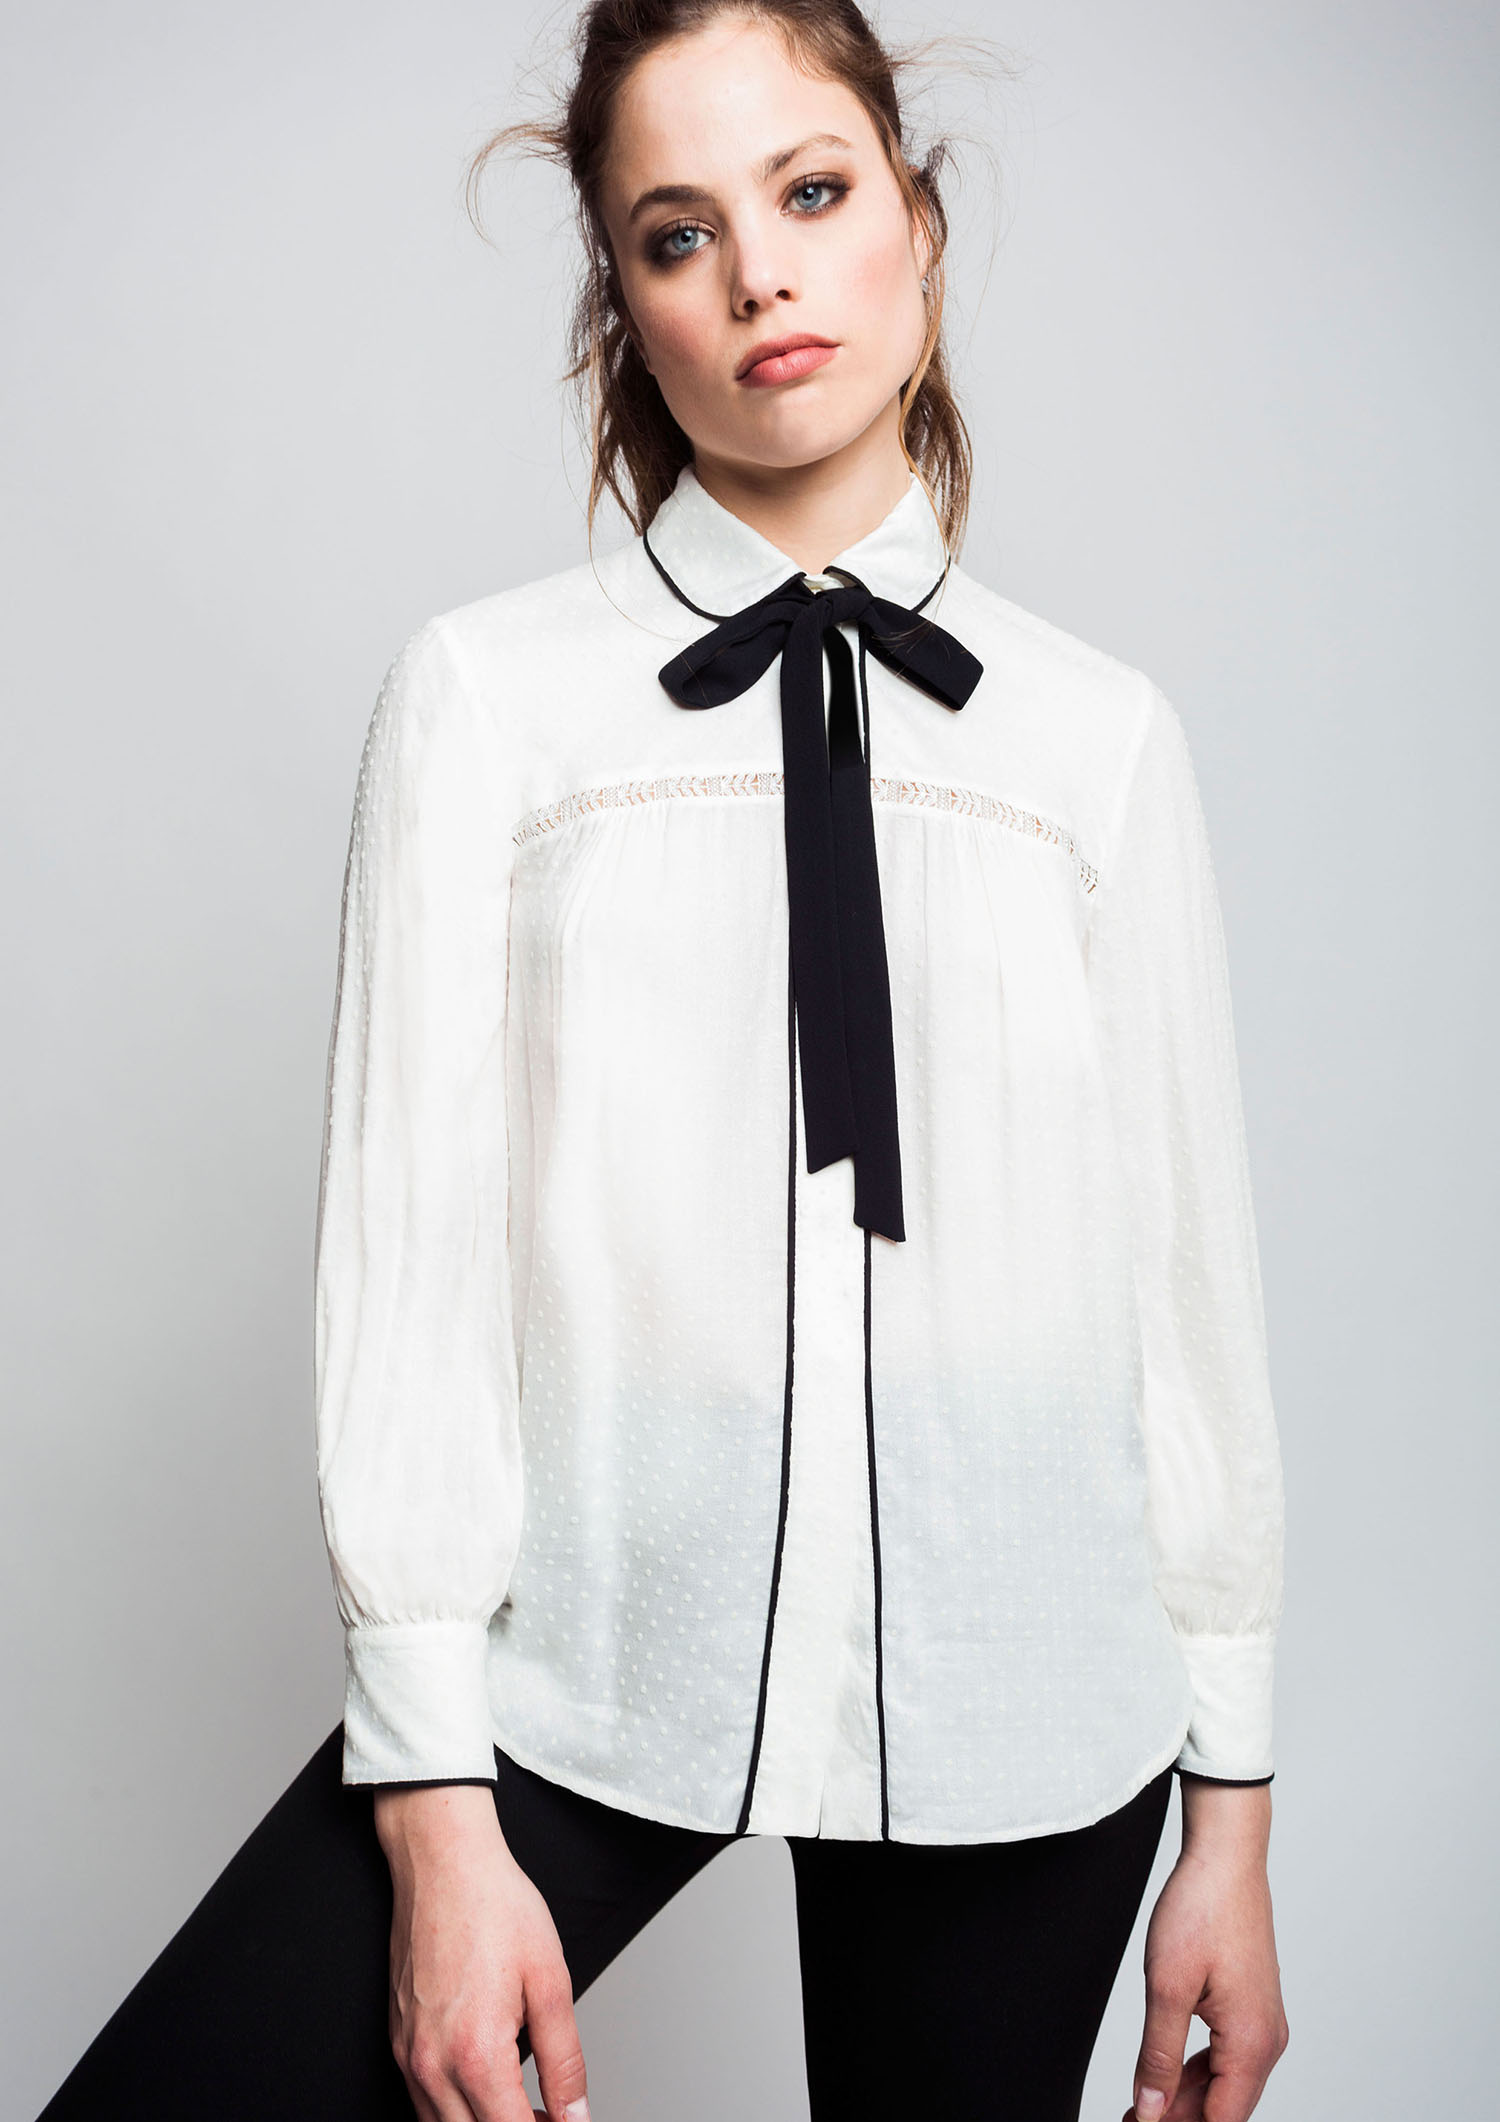 Ecru blouse with bow.